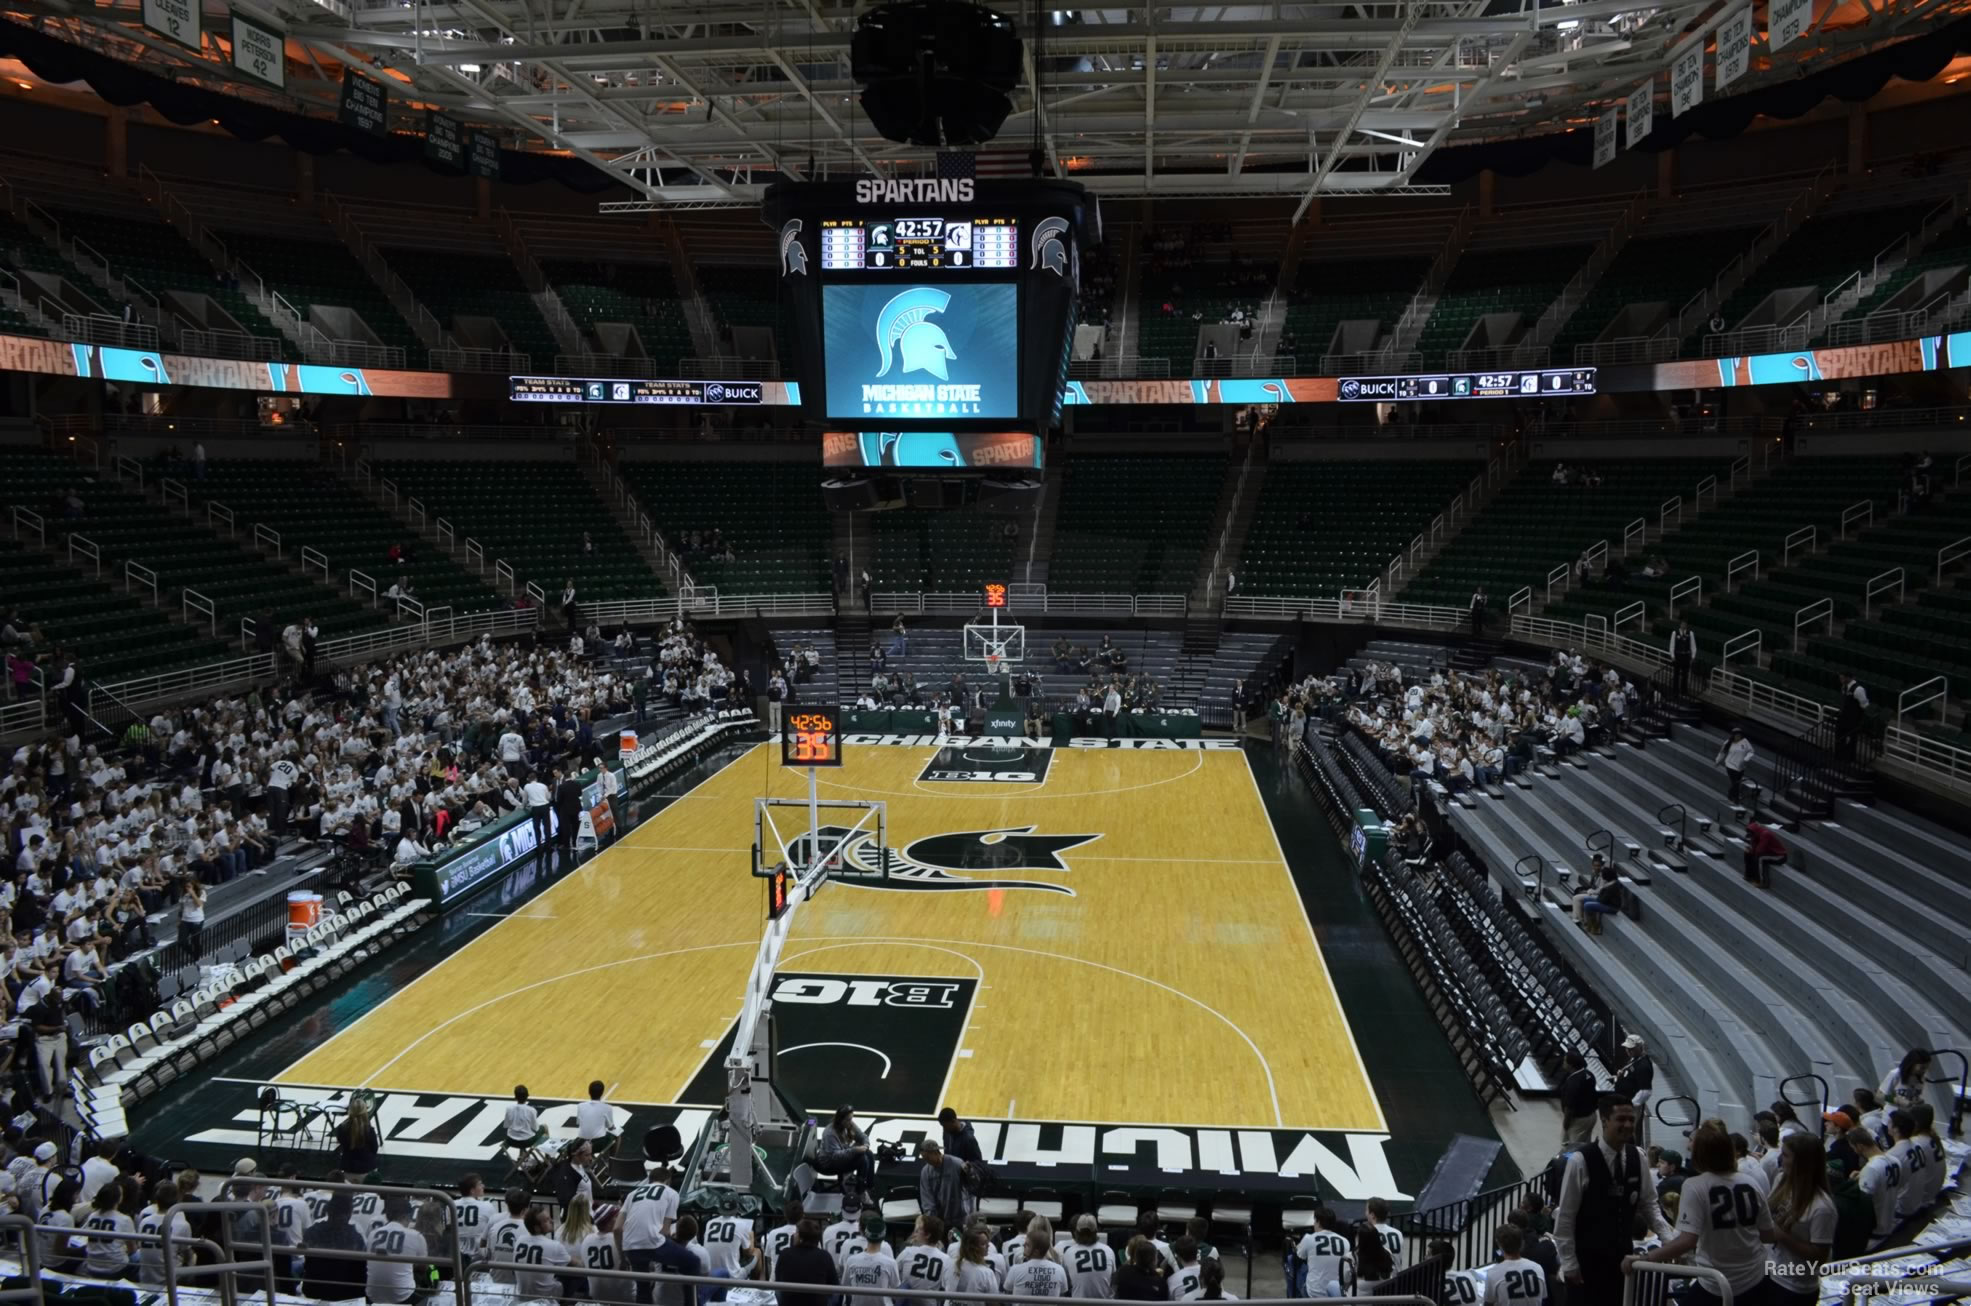 section 101, row 22 seat view  - breslin center